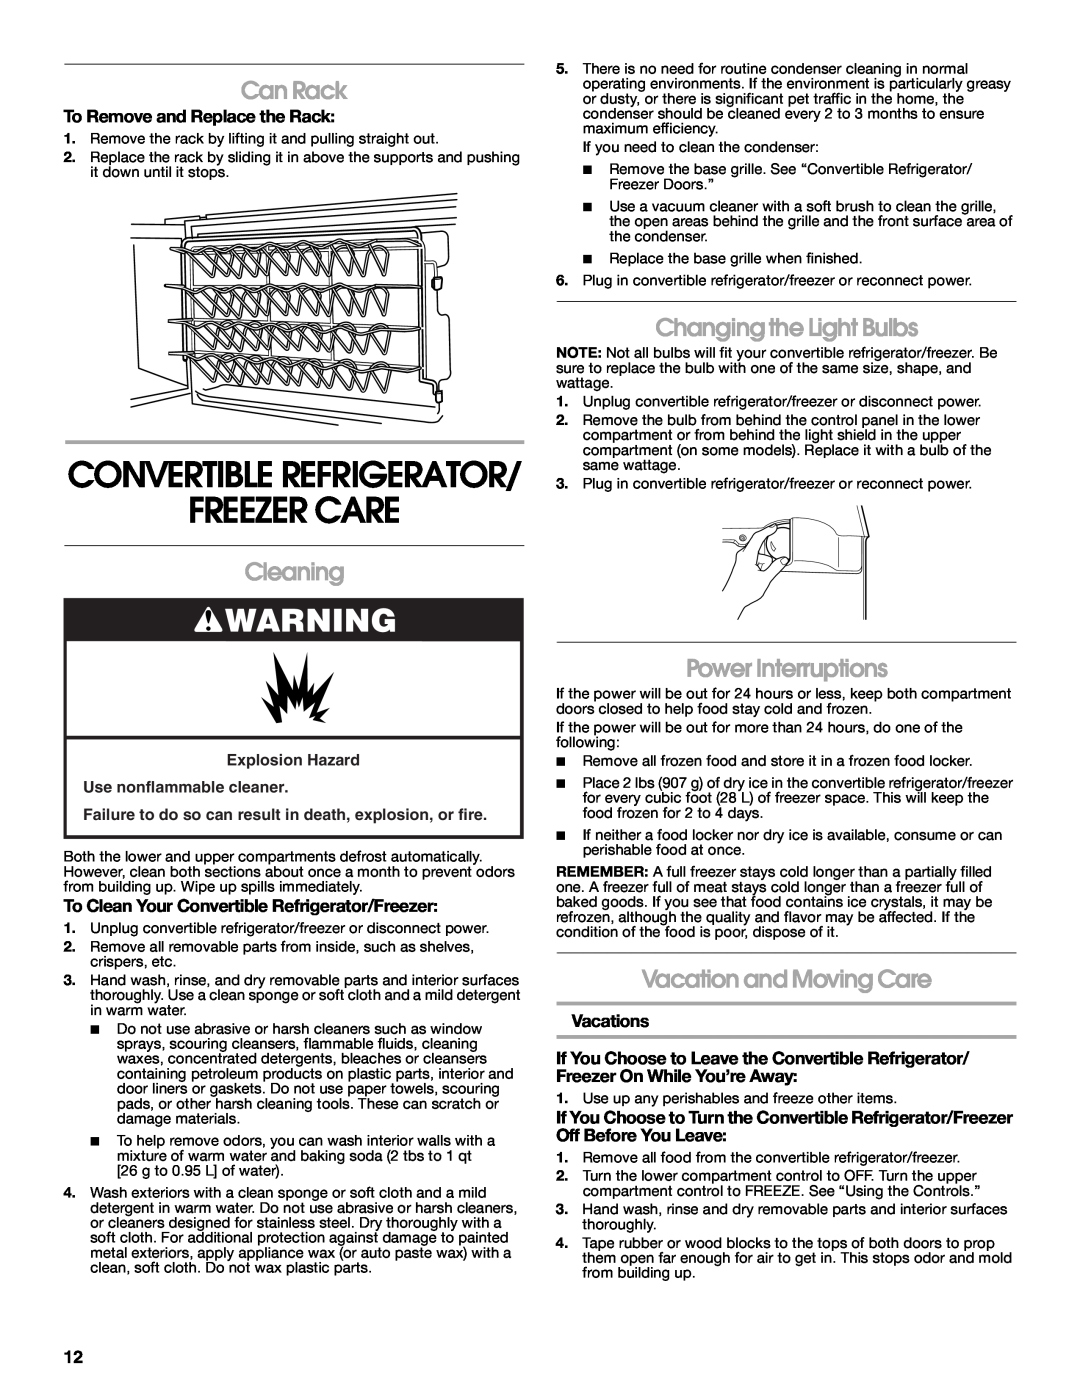 Whirlpool 2314466 manual Freezer Care, Convertible Refrigerator, Can Rack, Cleaning, Changing the Light Bulbs, Vacations 